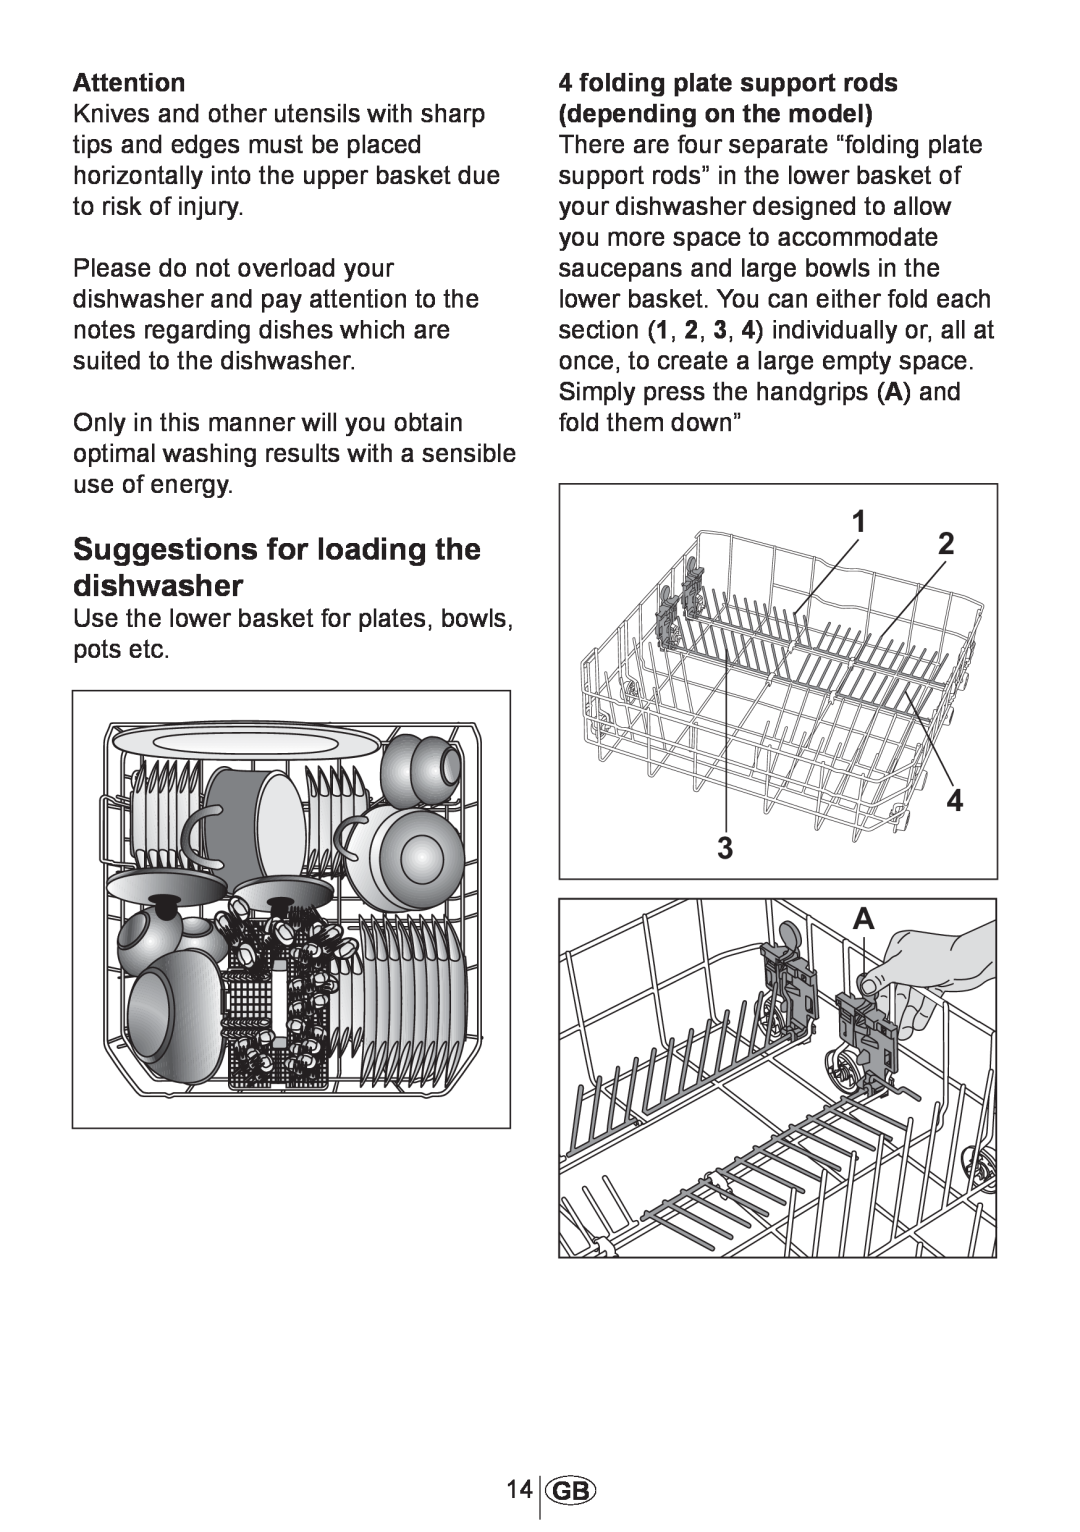 Beko 3905 MI Suggestions for loading the dishwasher, folding plate support rods depending on the model, 1017 